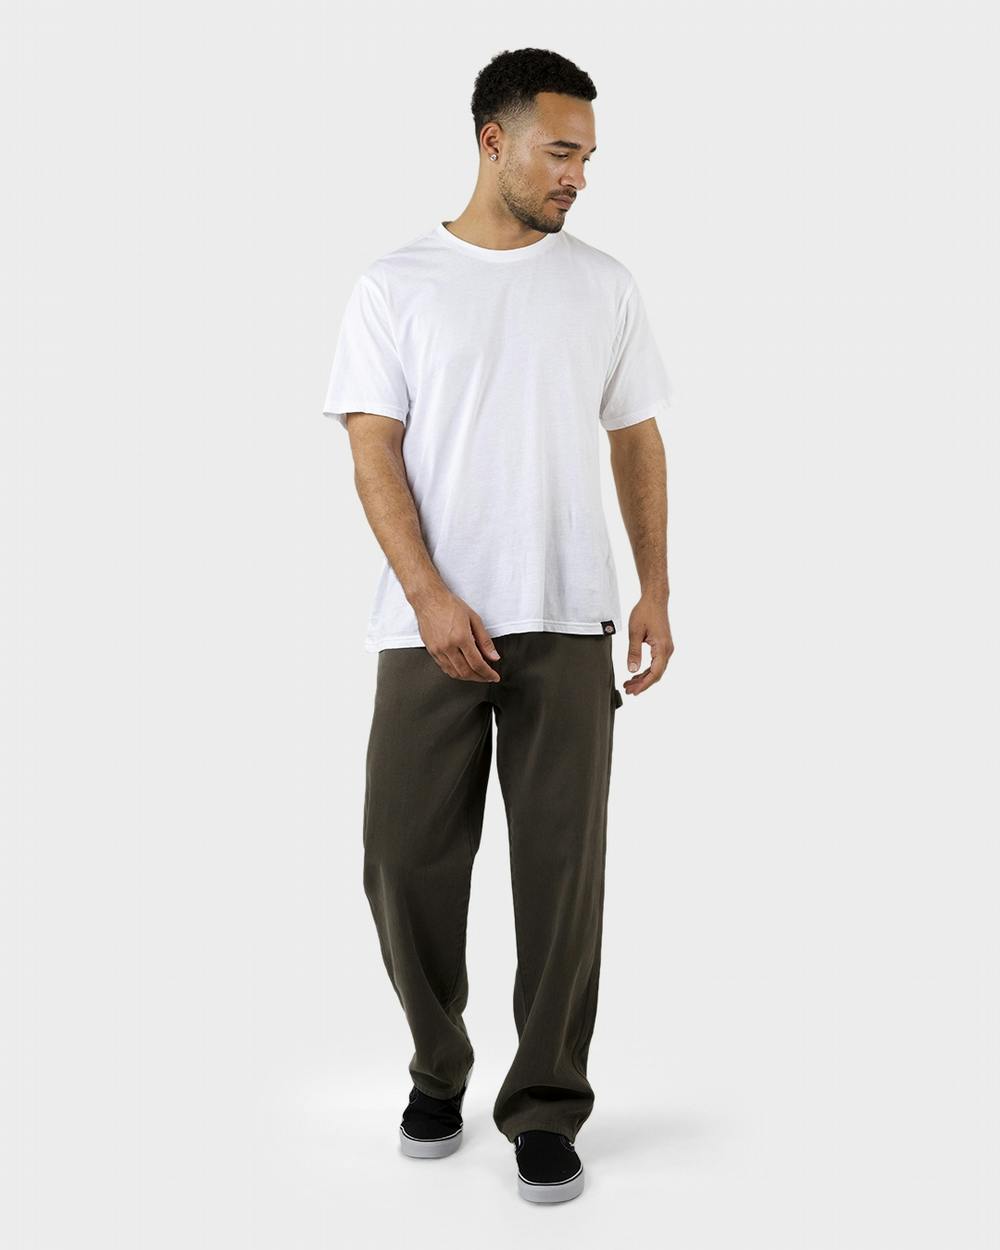 Dickies Relaxed-Fit Straight-Leg Carpenter Pant